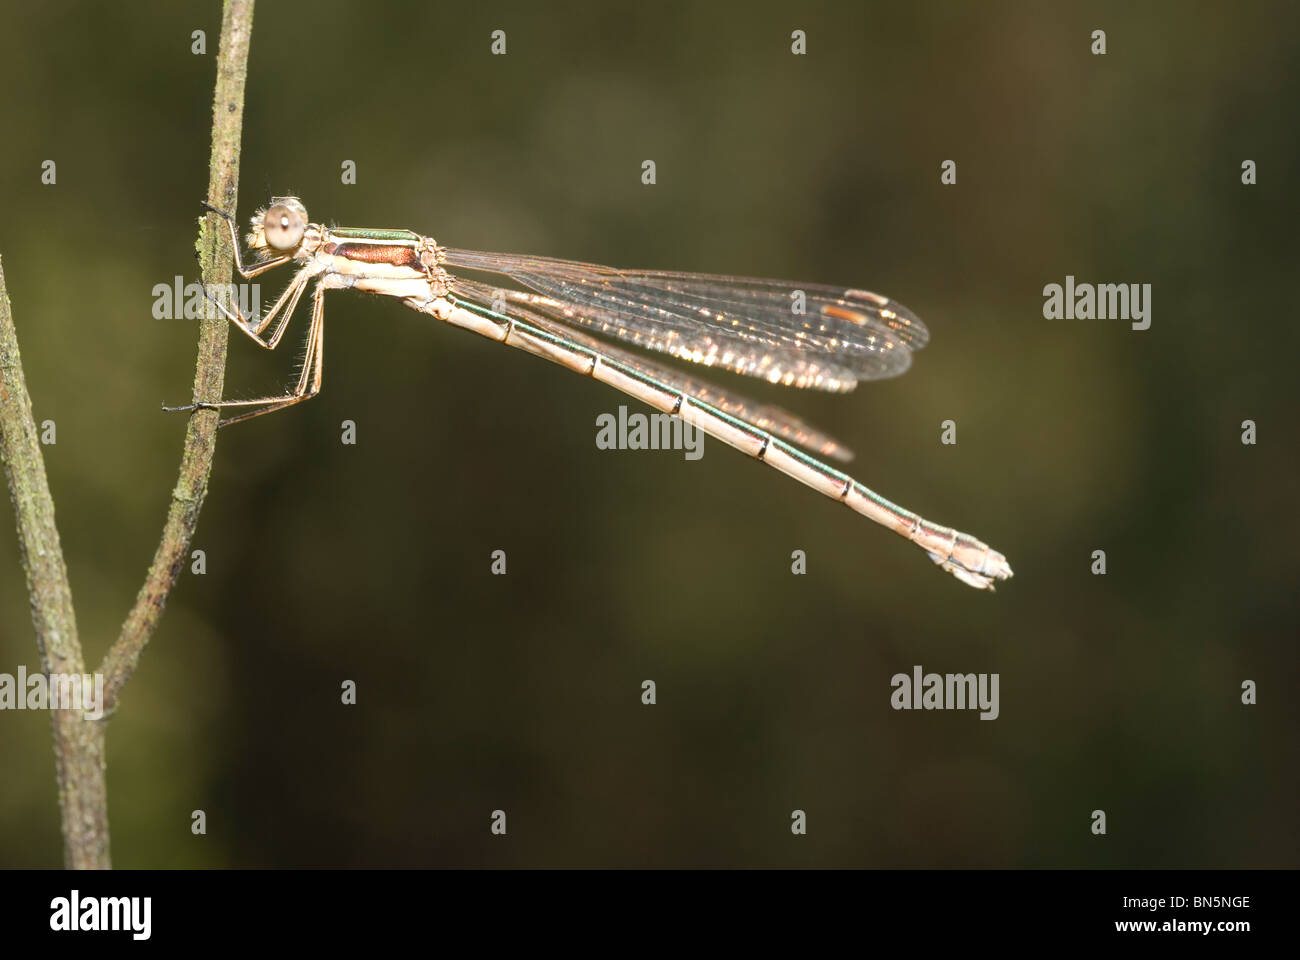 Small Emerald Damselfly or Small Spreadwing (Lestes virens) Stock Photo